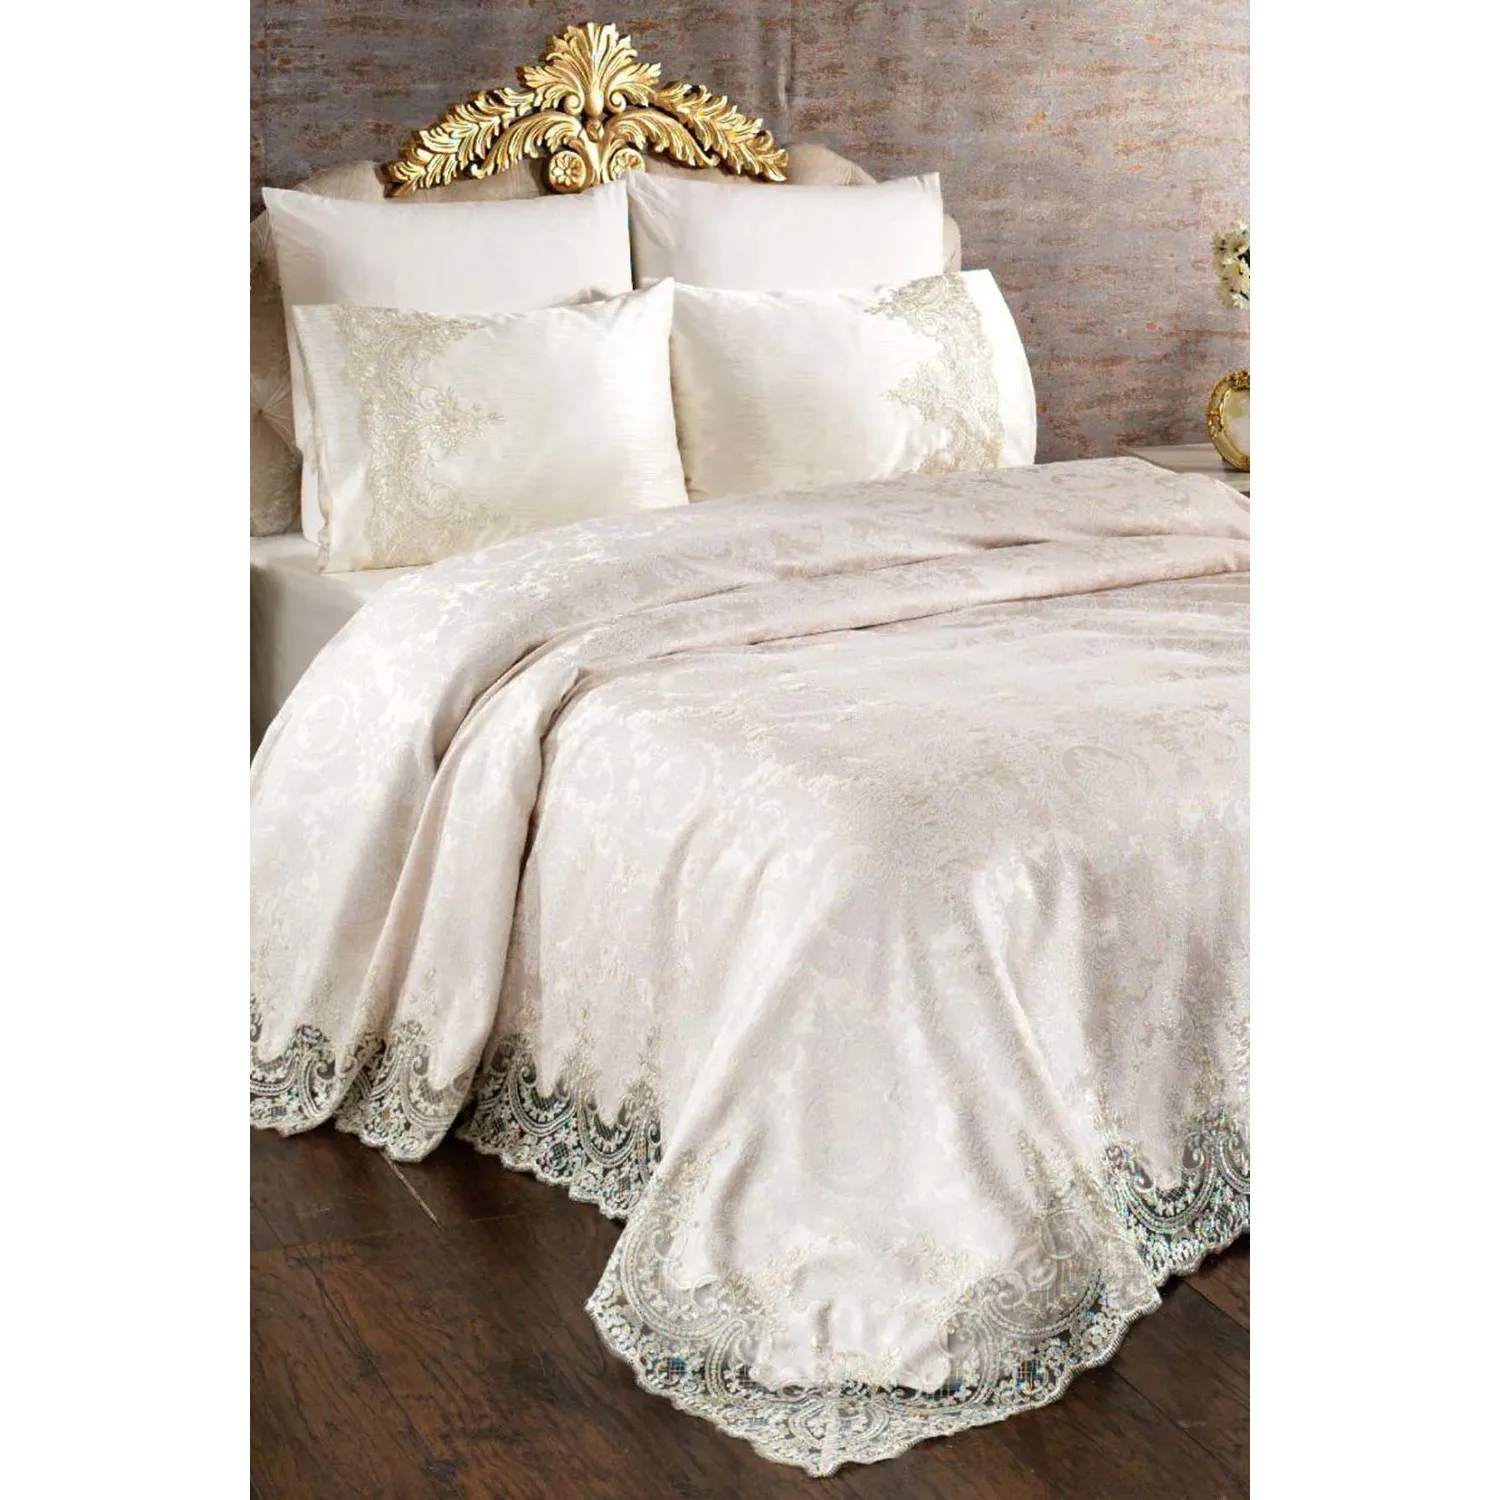 

6 Pieces Chenille Cream French Lace Double Pique Set Dowry Bedspread Set Bedspread Set Suitable for dowry, gift, daily use Fast